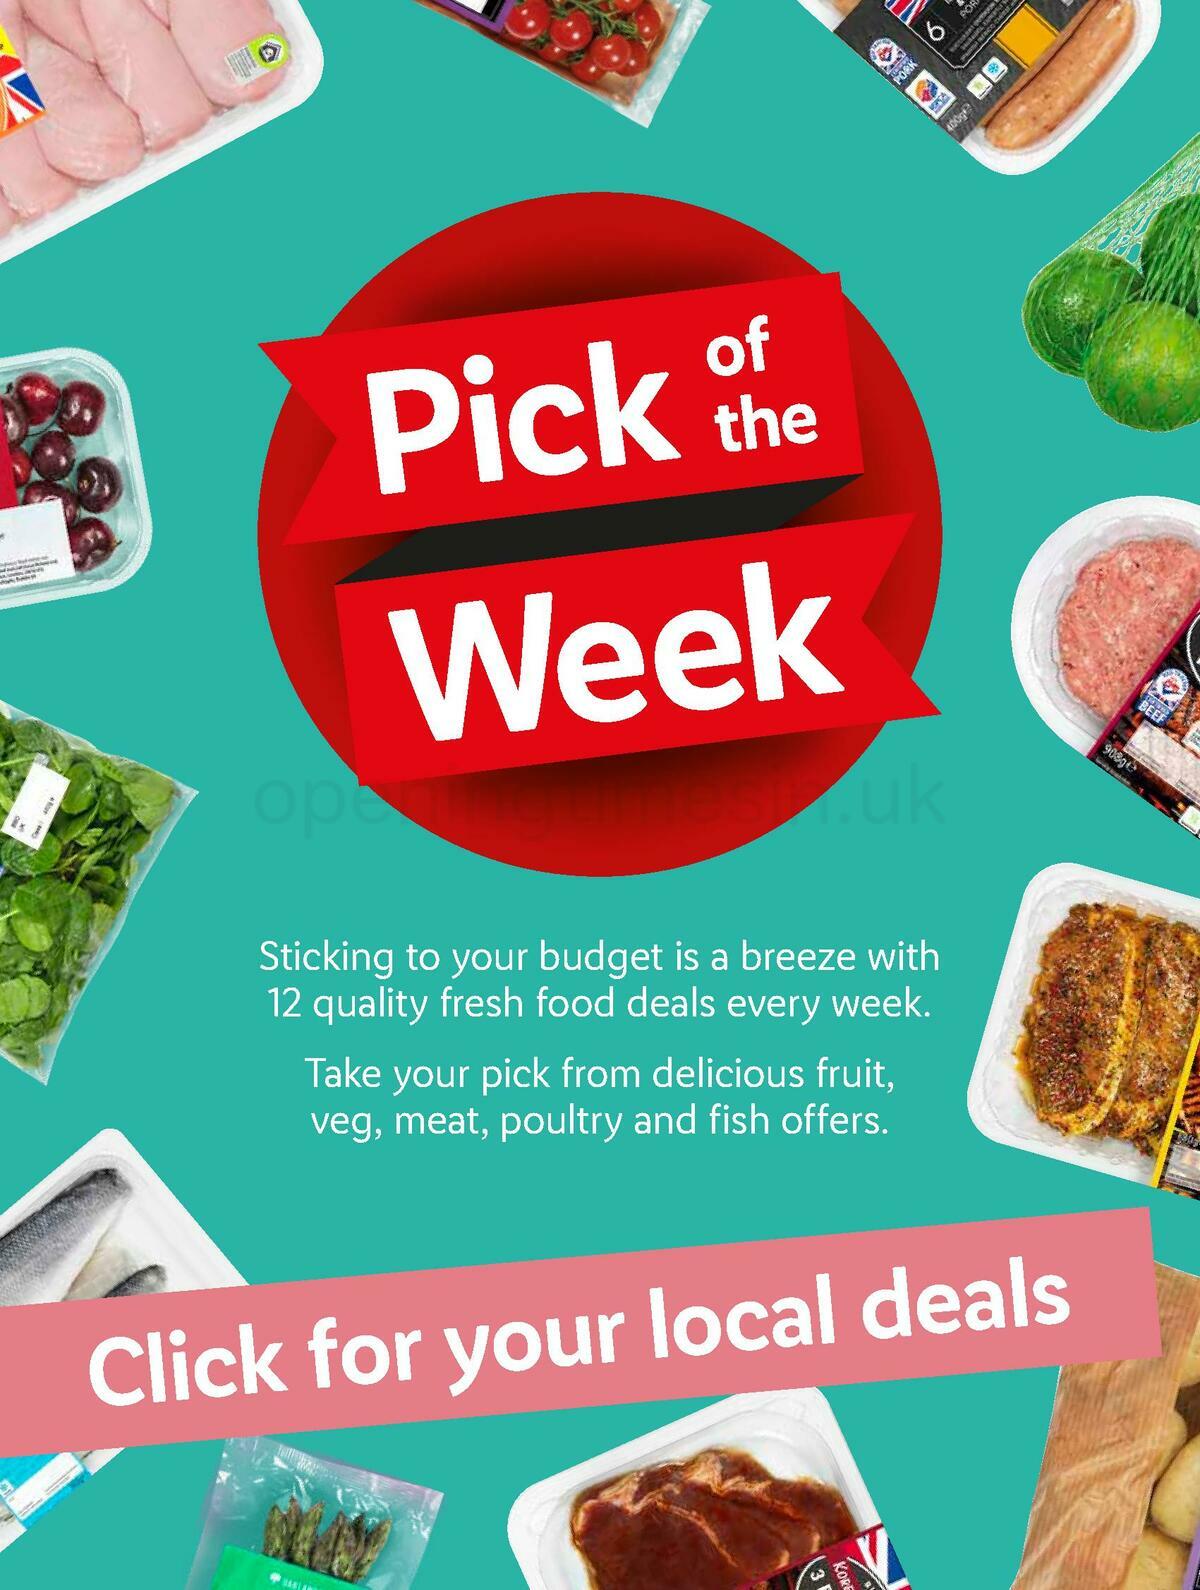 LIDL Offers from 1 September